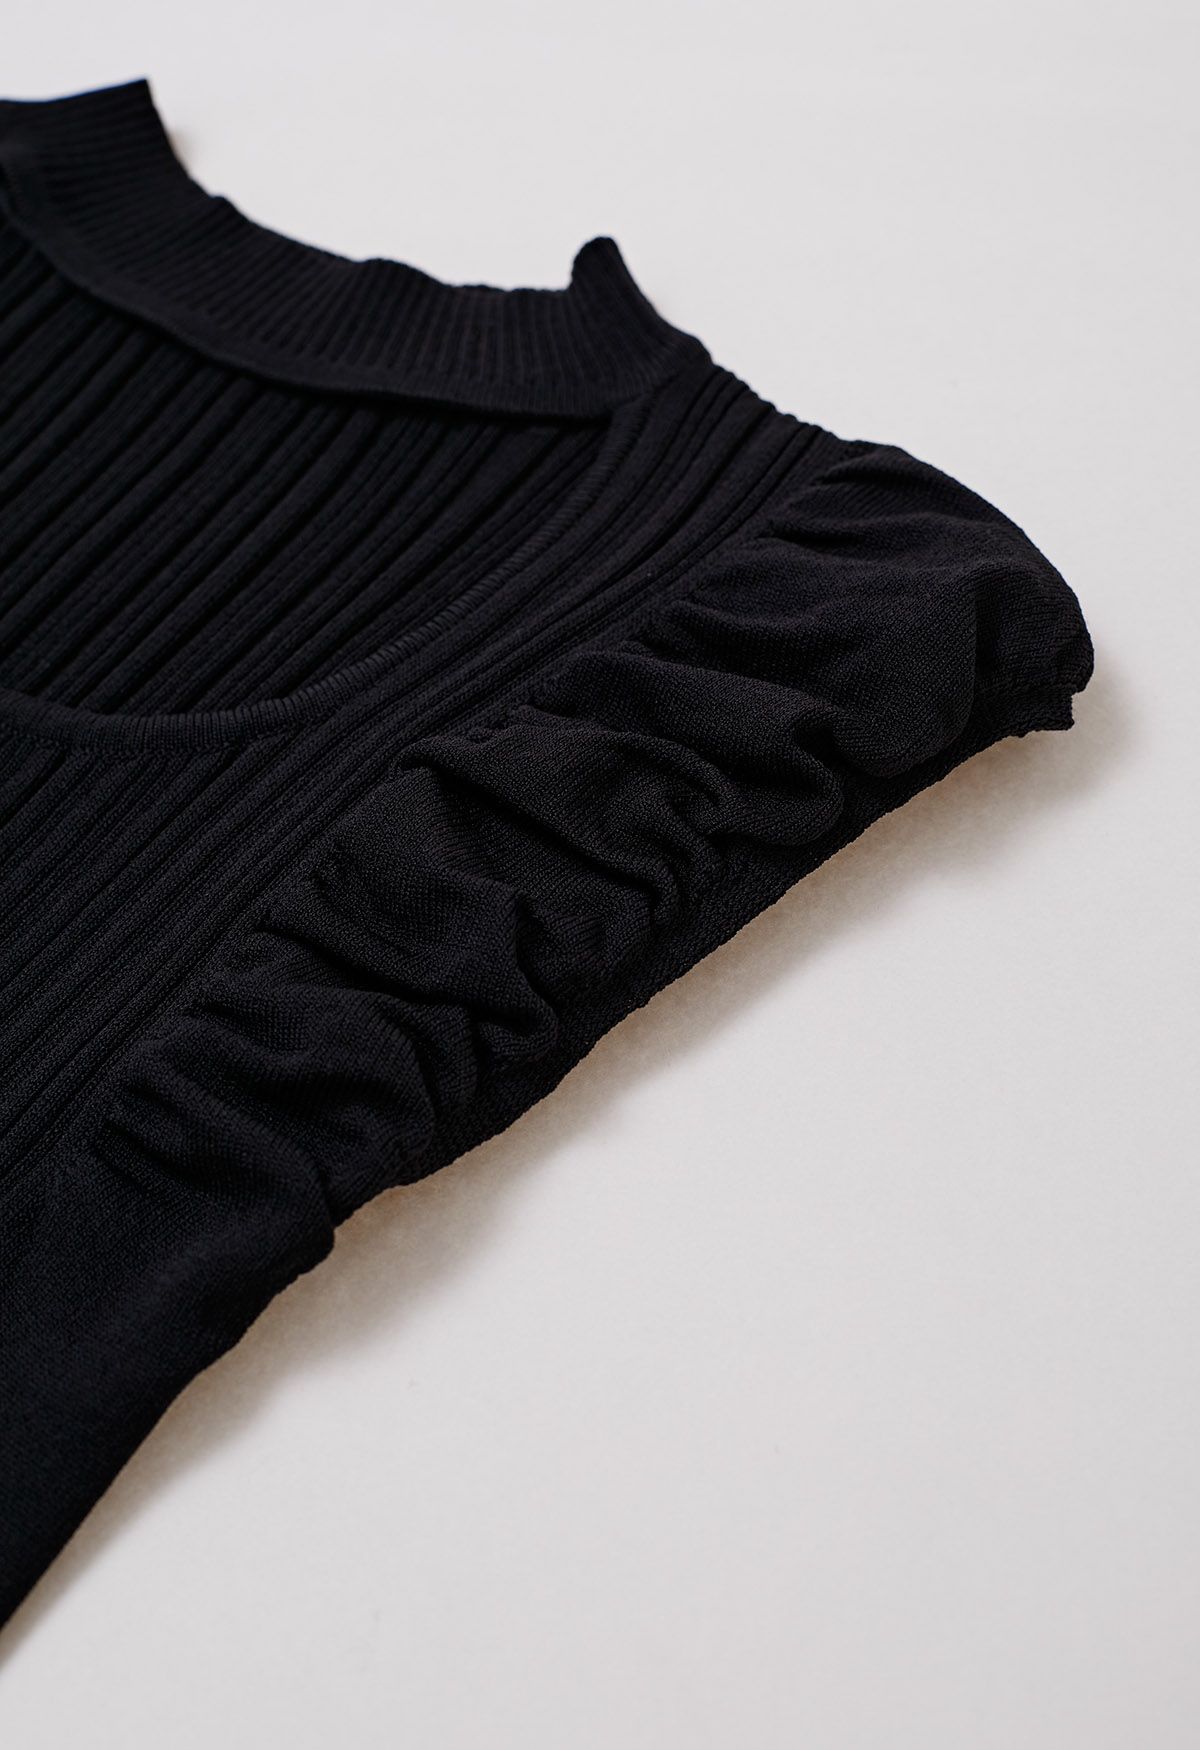 Choker Neck Ruched Cap Sleeves Knit Top in Black